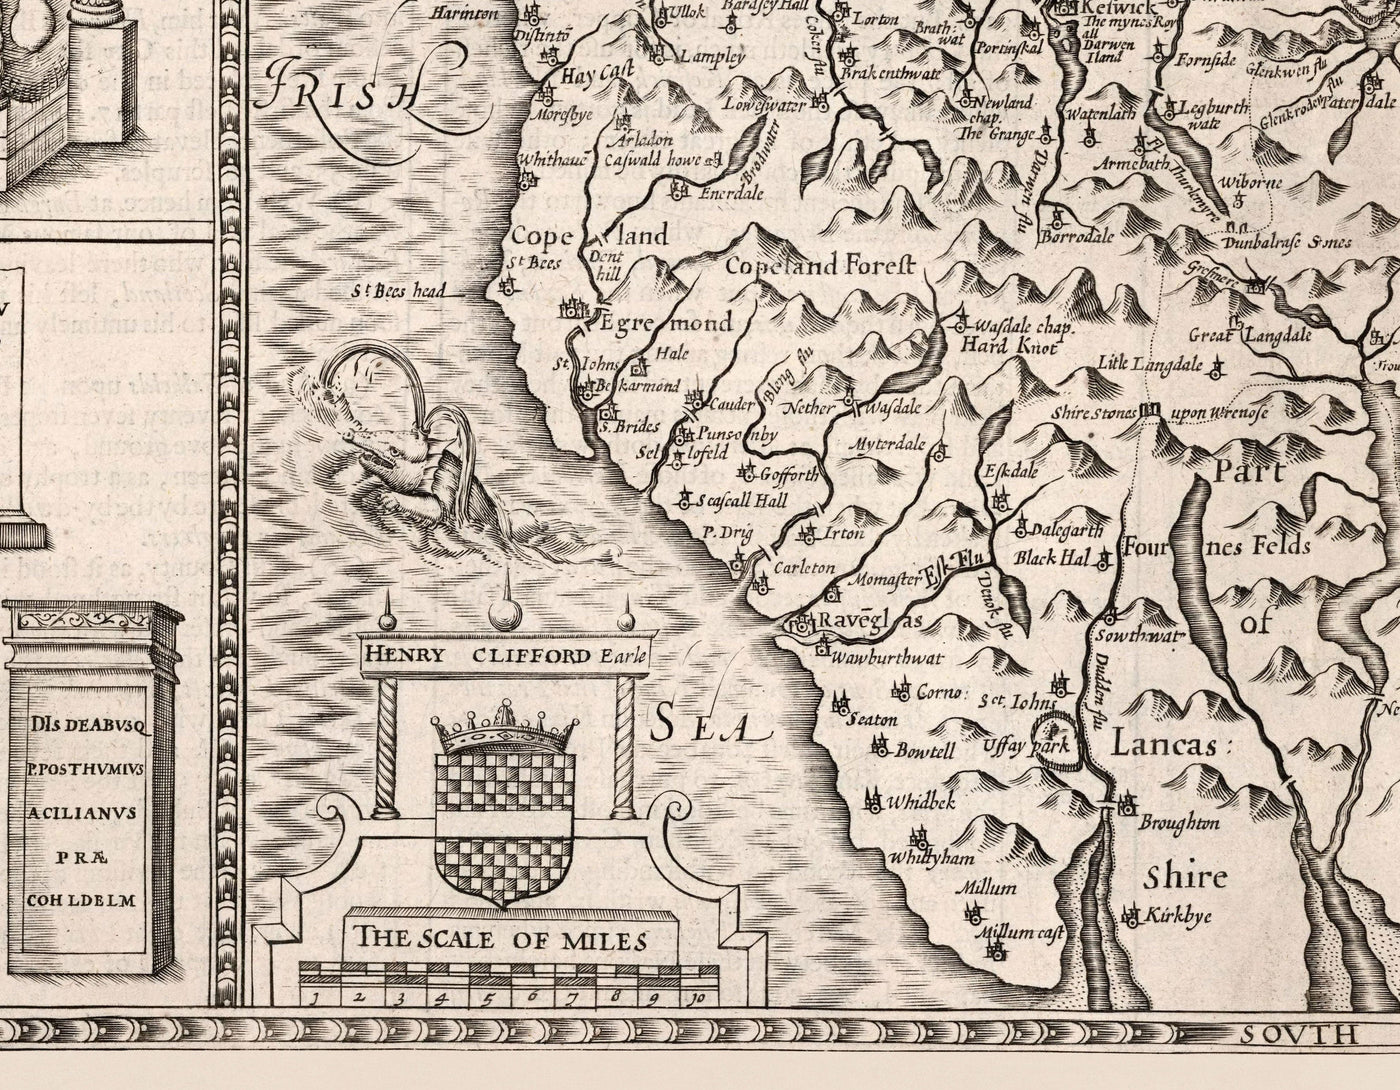 Old Map of Cumbria, 1611 by John Speed - Cumberland, Carlisle, Keswick, Lake District, Windermere, Picts & Hadrian's Wall